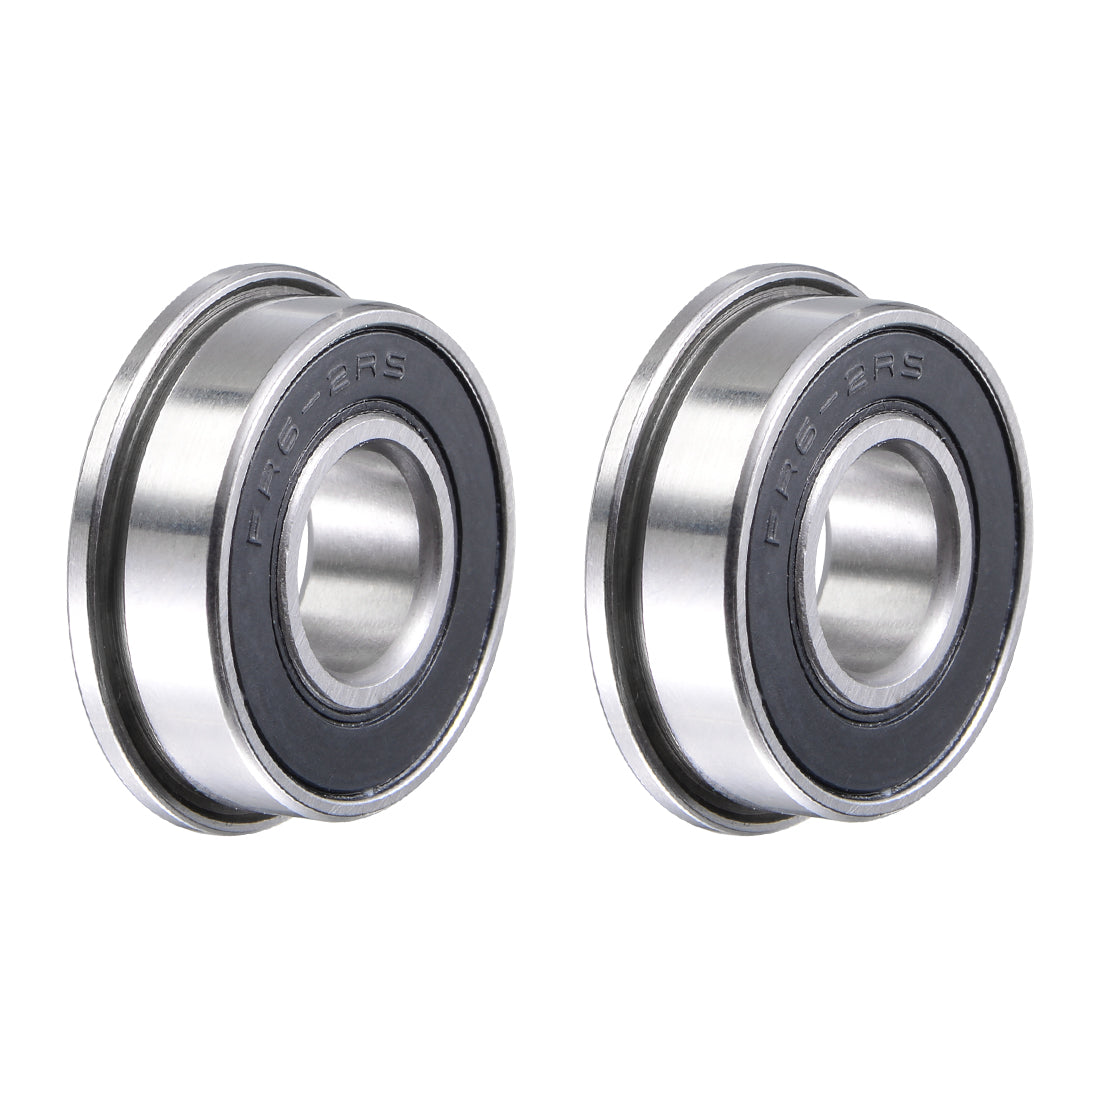 uxcell Uxcell FR6-2RS Flange Ball Bearing 3/8"x 7/8"x 9/32" Sealed Chrome Steel Miniature Ball Bearings 2pcs